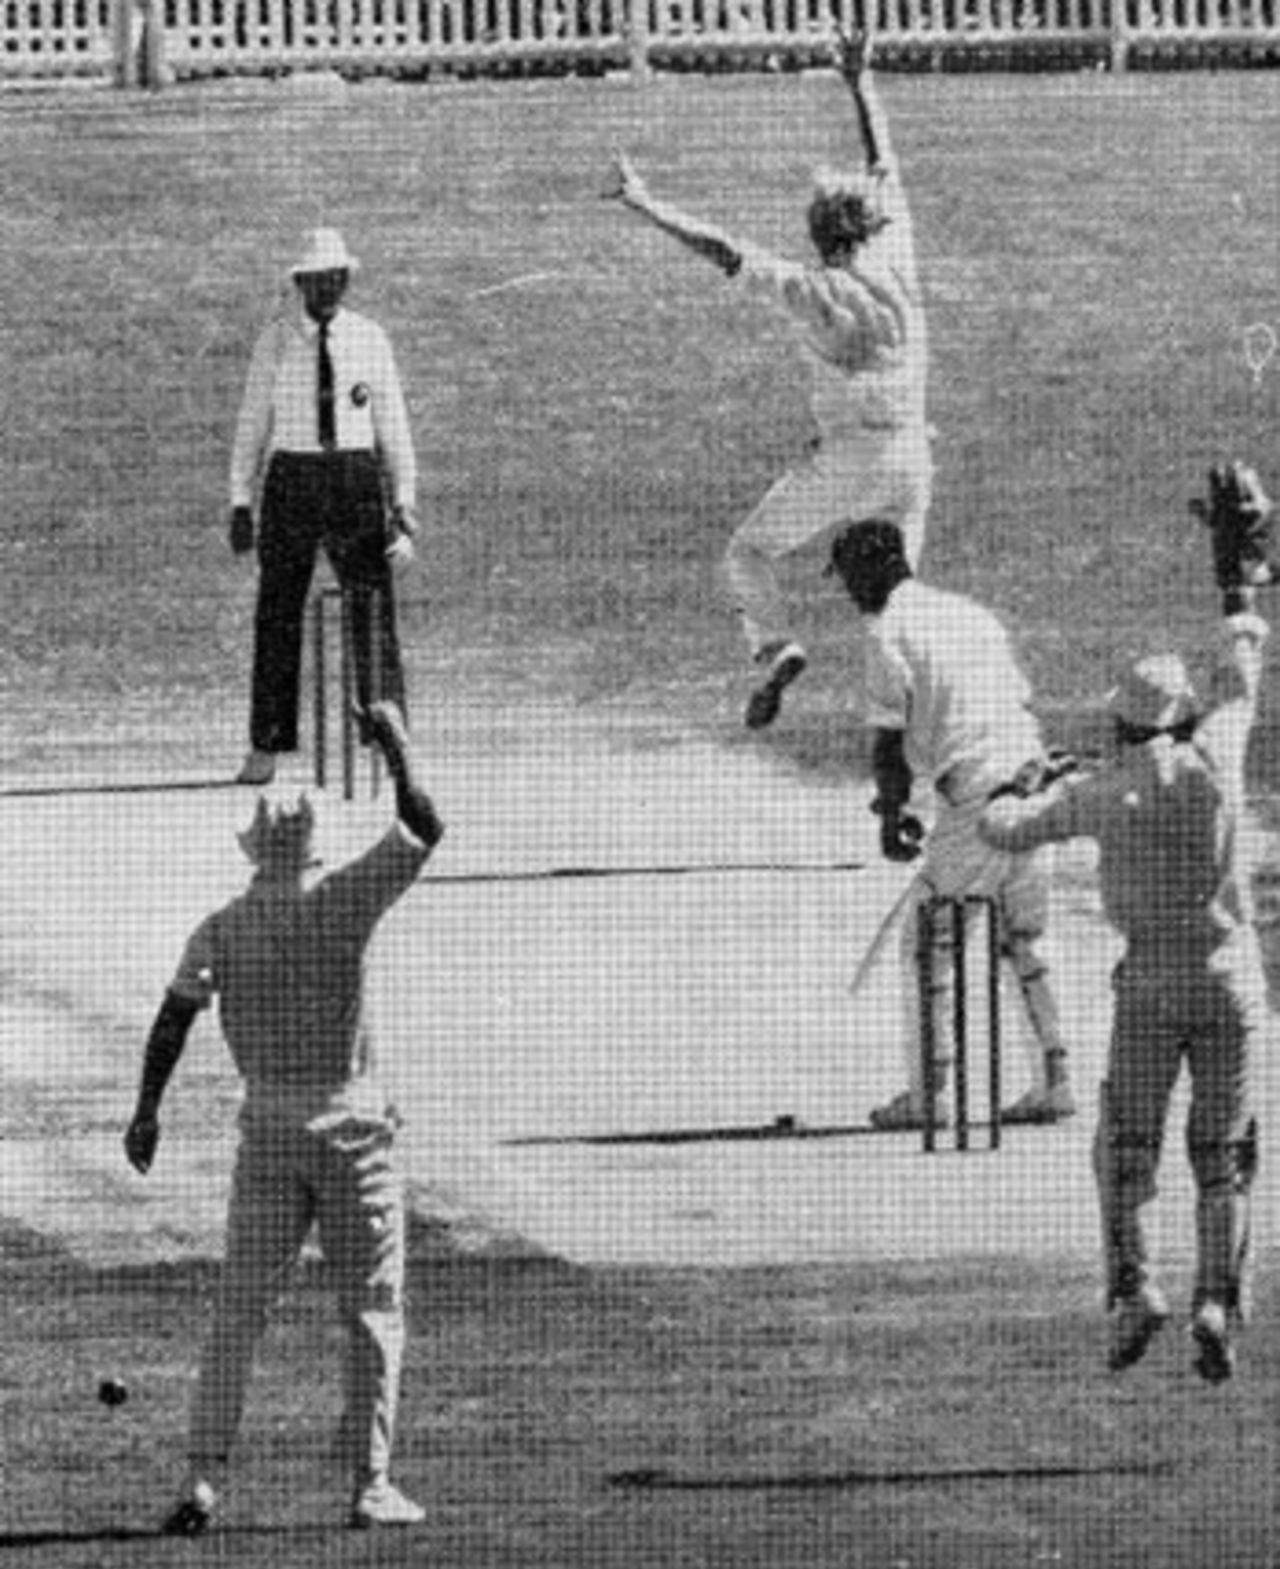 Bob Massie trapped lbw by Tony Greig - Greig took 6 for 30 in Australia's first innings, Australia v World XI, Adelaide, February 1972